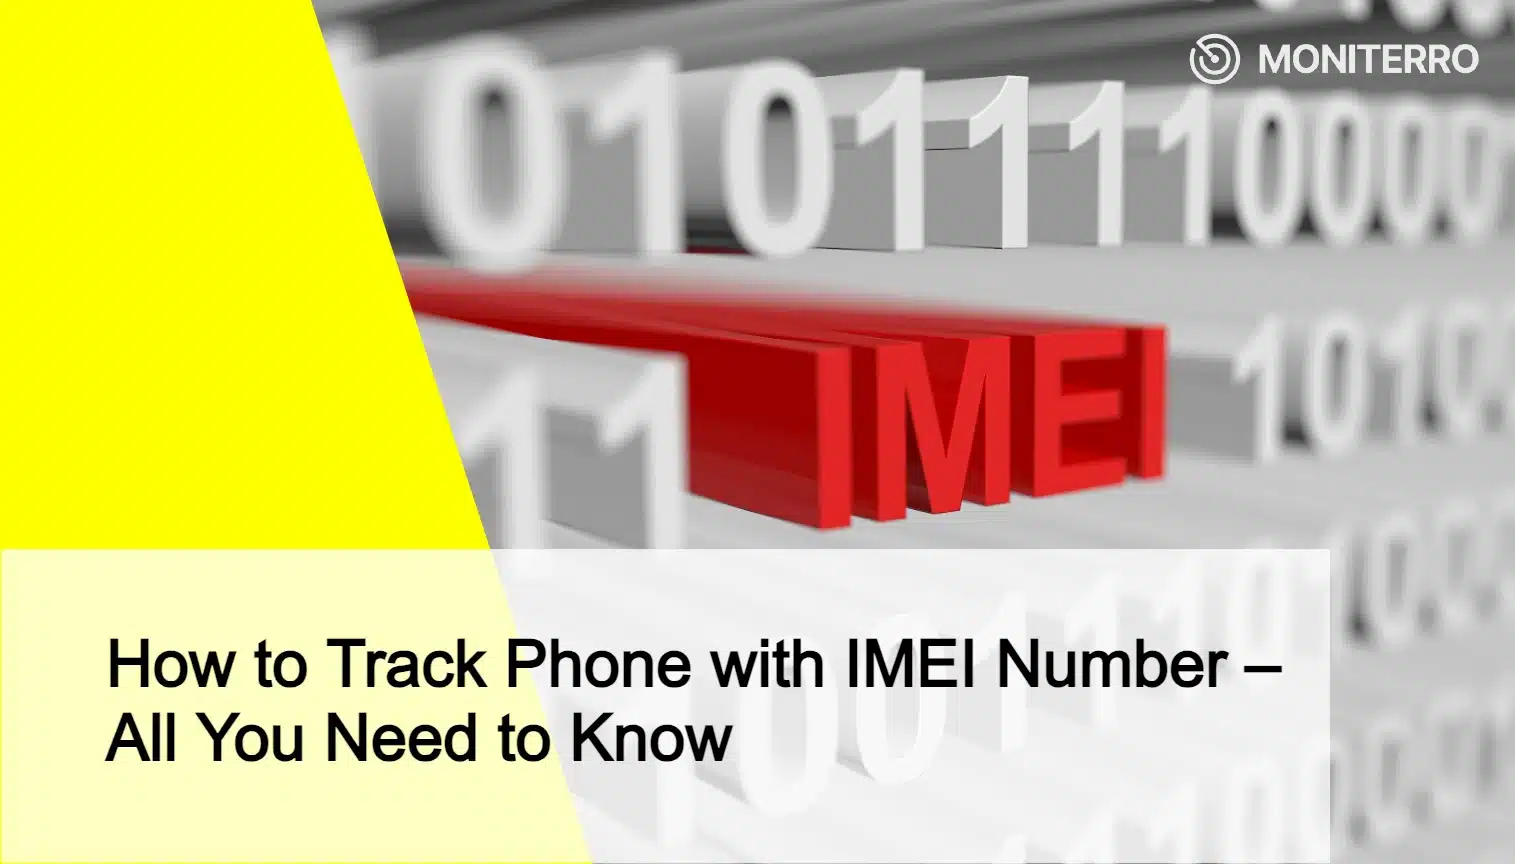 How to Track Phone with IMEI Number – All You Need to Know